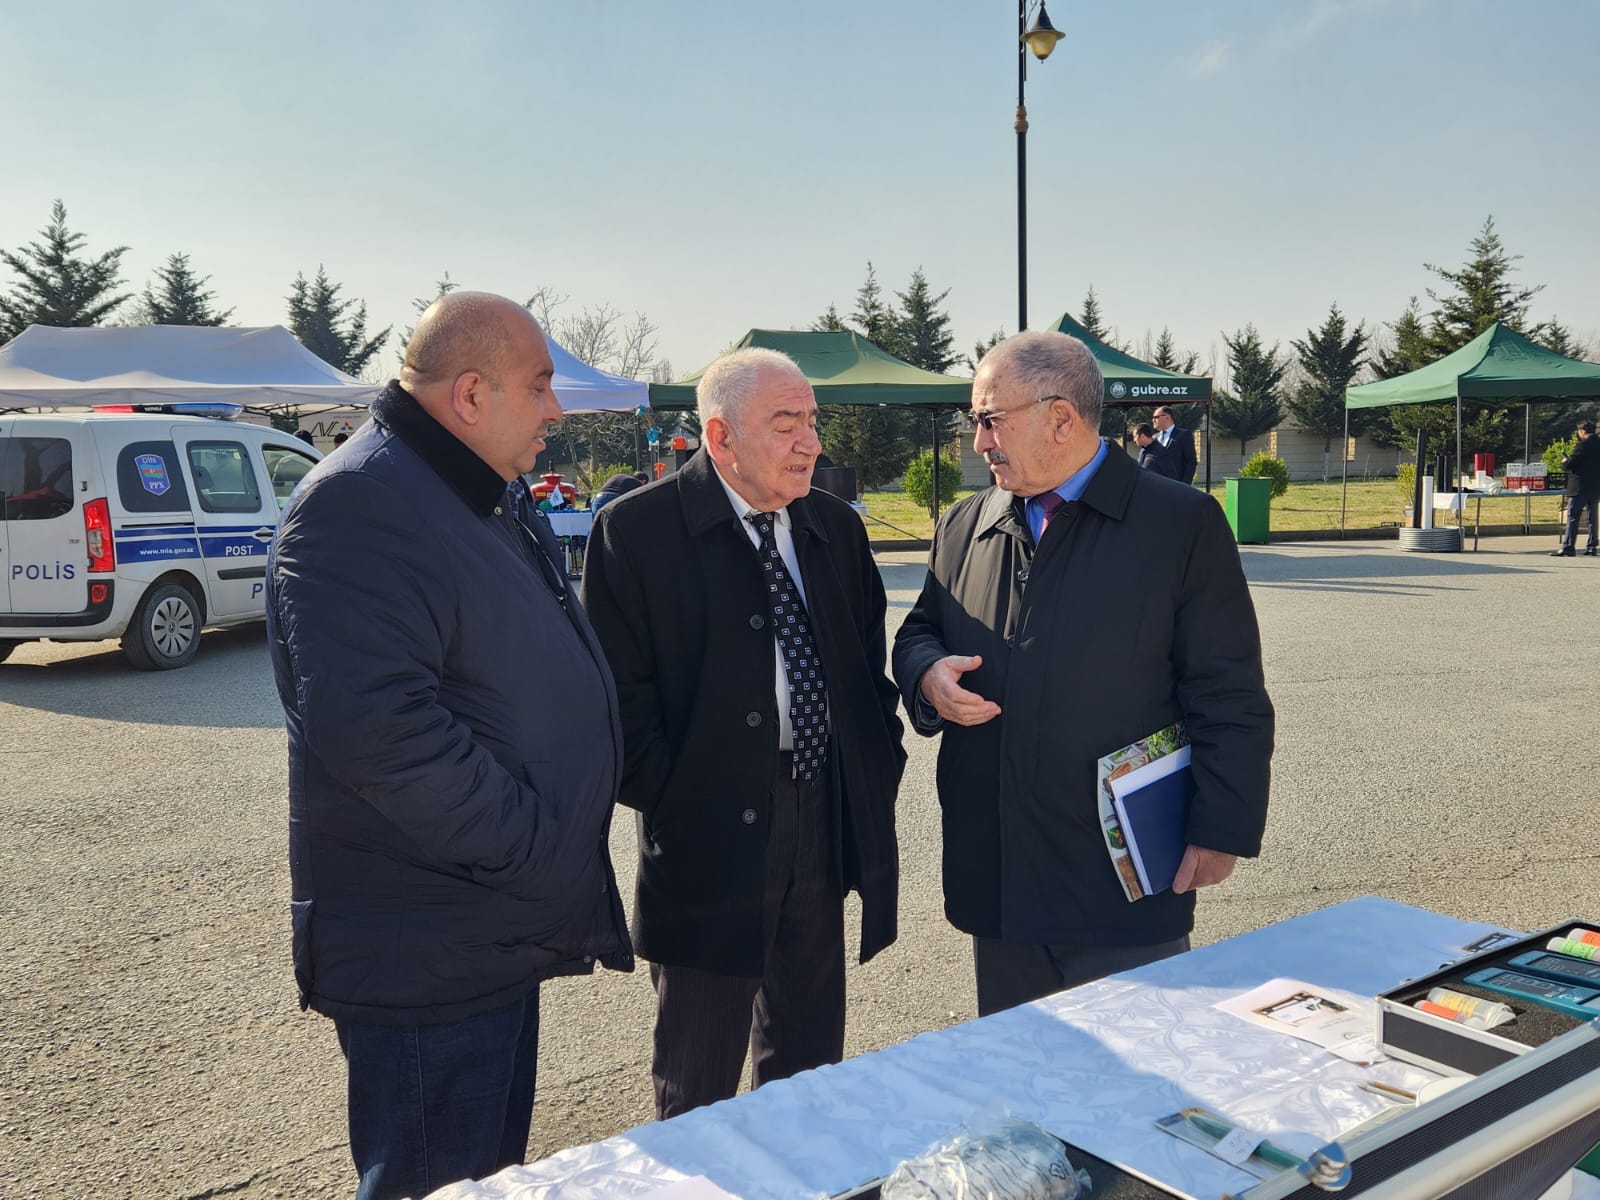 The Institute of Soil Science and Agro-Chemistry of the Ministry of Science and Education of the Republic of Azerbaijan participated in the Agrarian Innovation Festival held in Khachmaz.